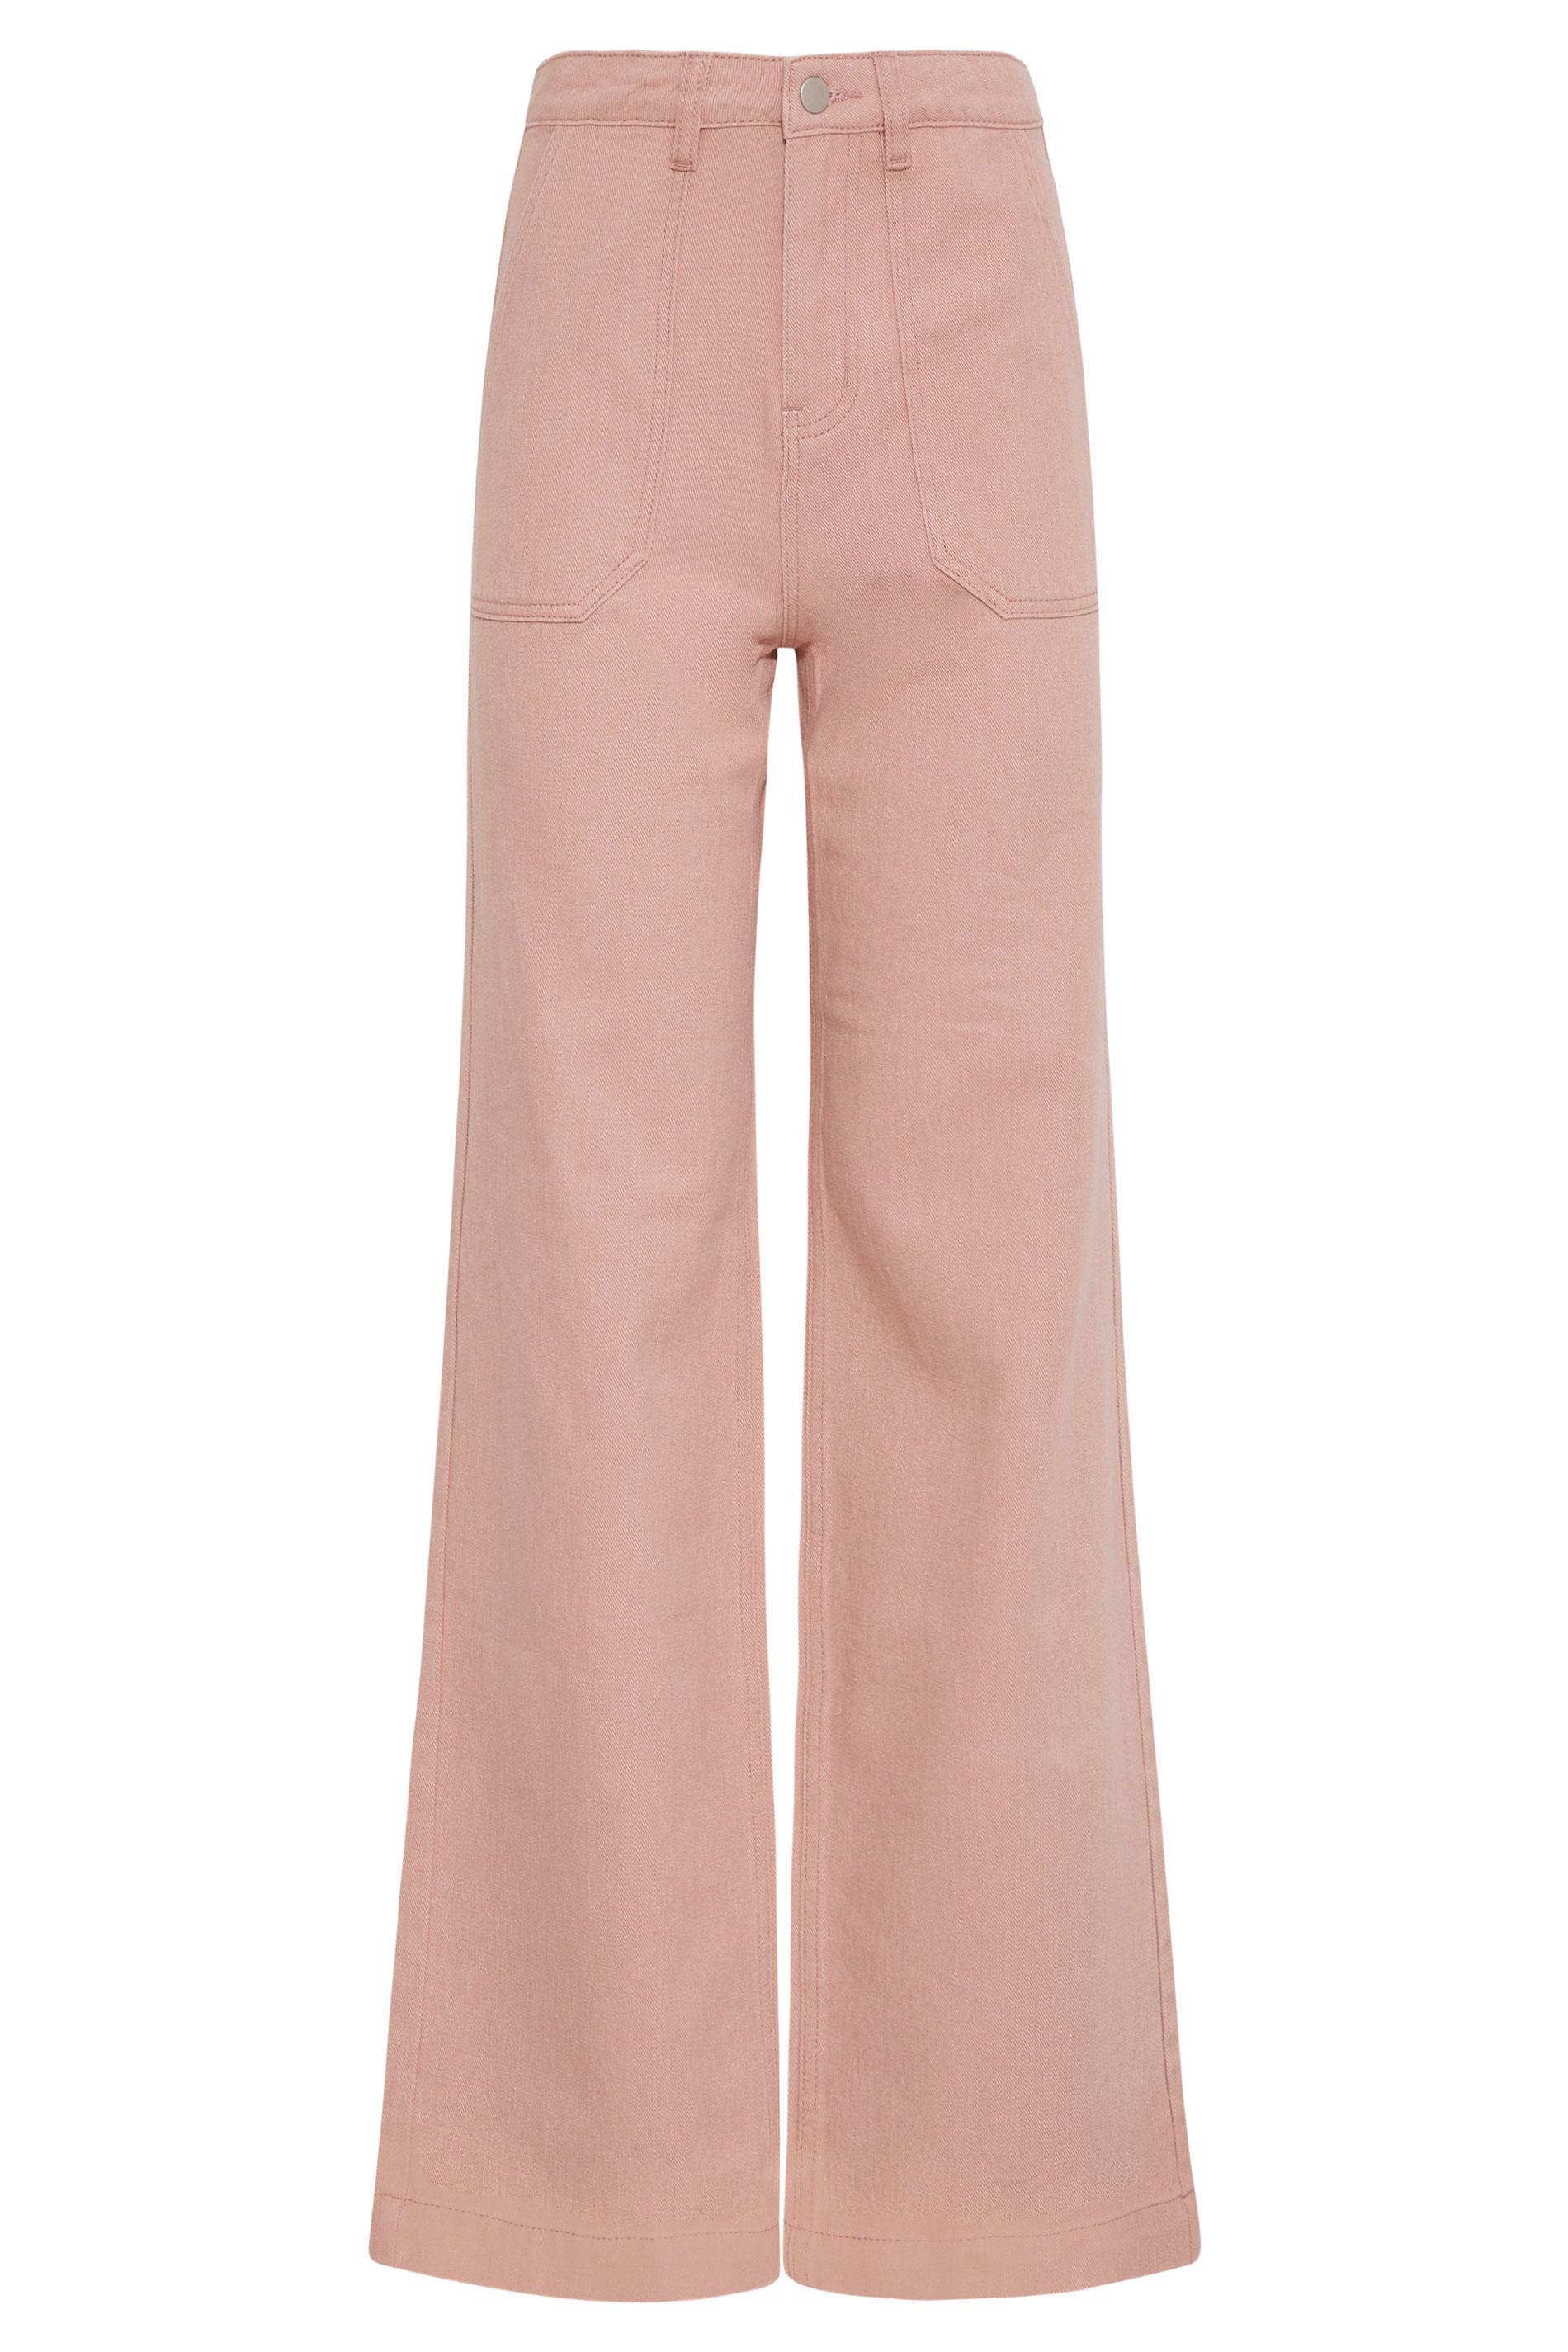 HM Wide twill trousers  Twill pants Work outfit Nordstrom anniversary  sale